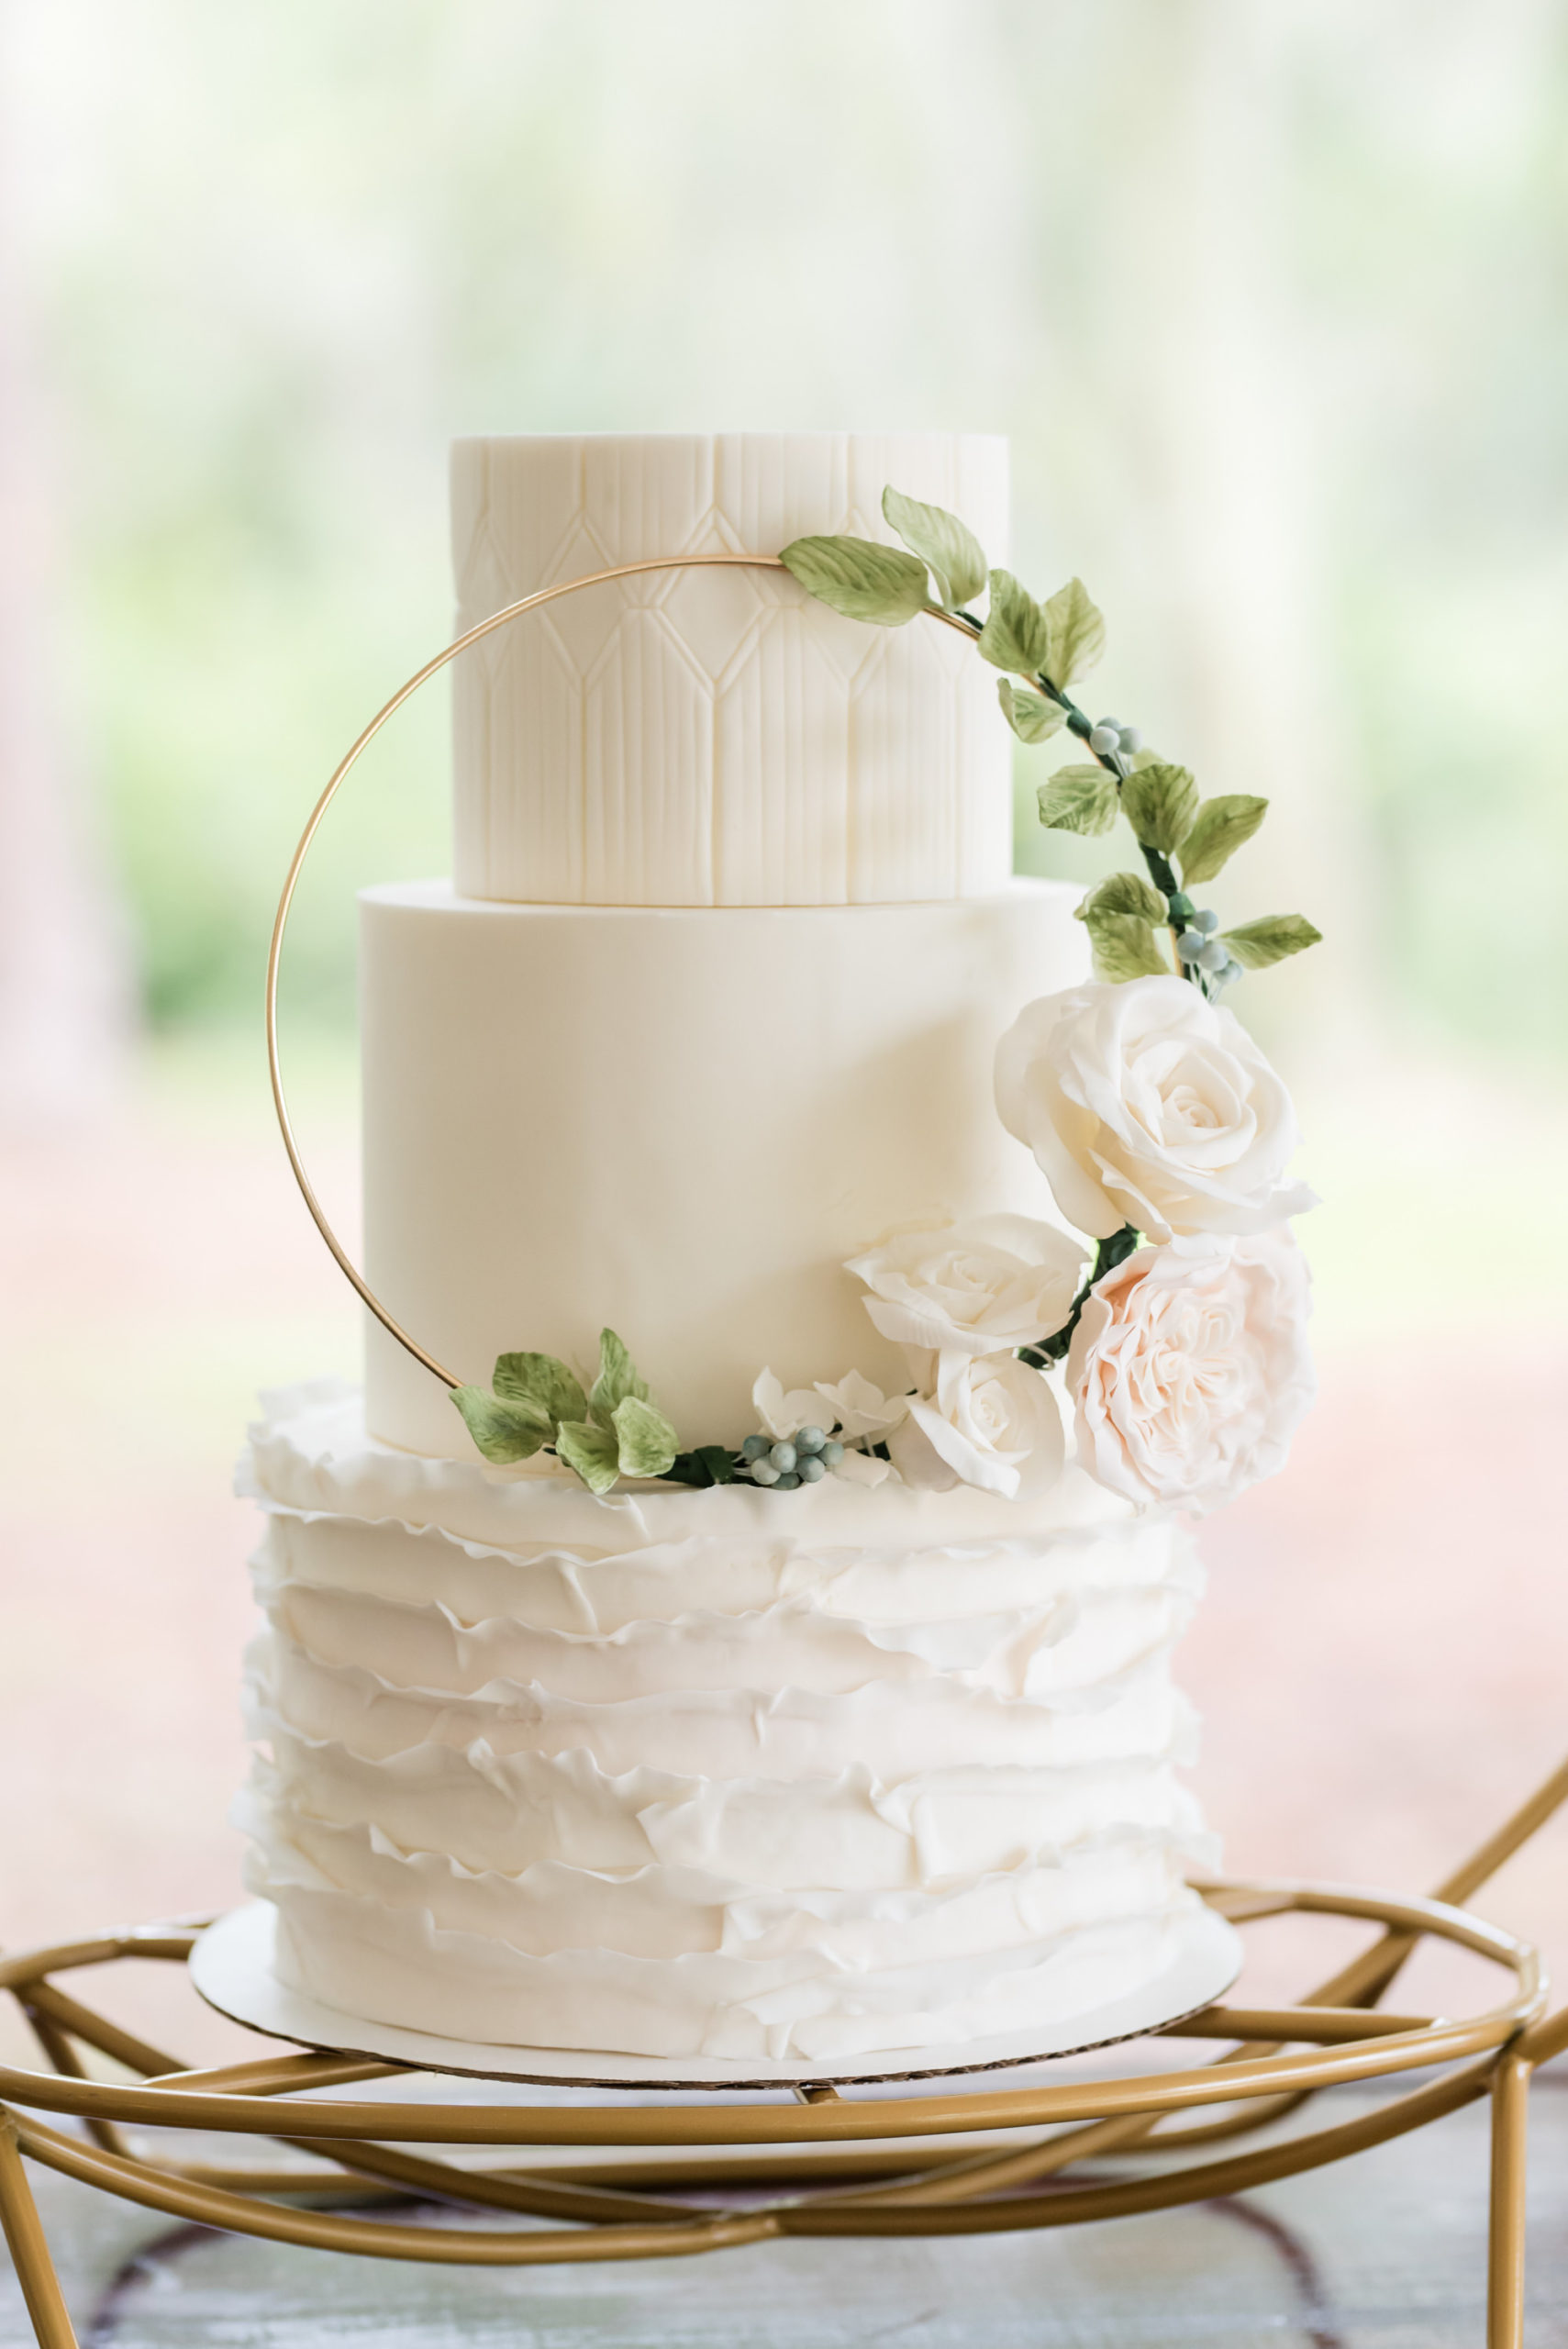 Dusty Rose Styled Wedding Shoot, Three Tier White Ruffled Bottom Tier Wedding Cake with Gold Circular Ornament with Greenery Leaves, Blush Pink and White Roses | Tampa Bay Wedding Planner Elegant Affairs by Design | Wedding Baker Tampa Bay Cake Company